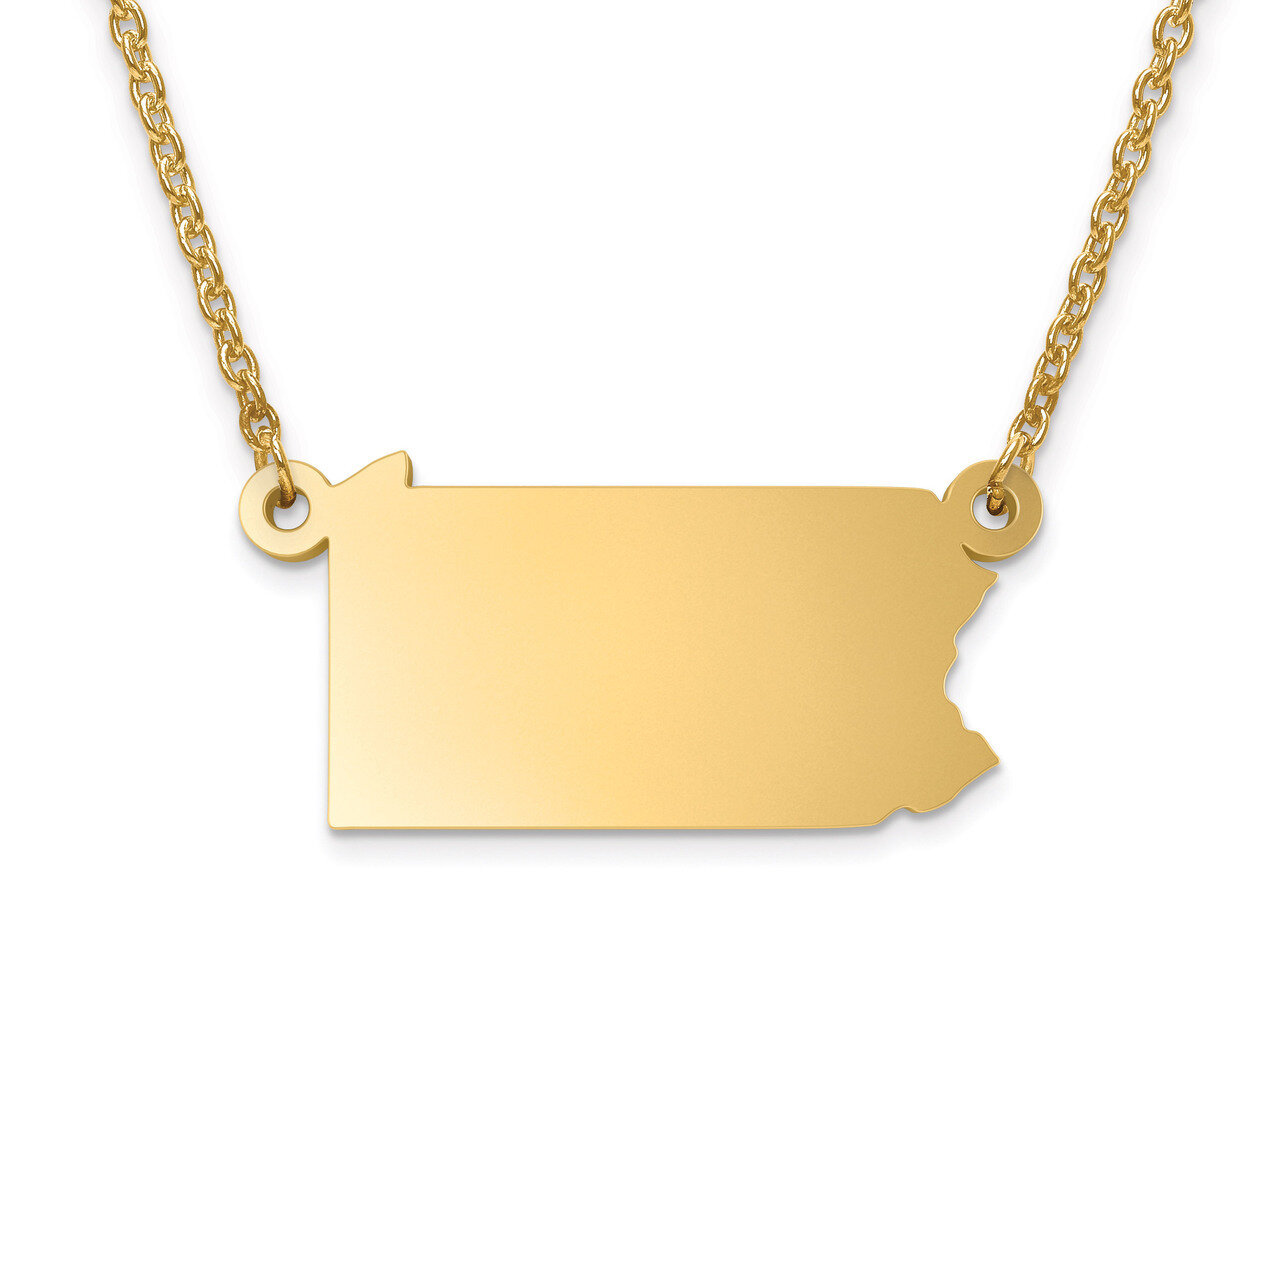 Pennsylvania State Pendant with Chain Engravable Gold-plated on Sterling Silver